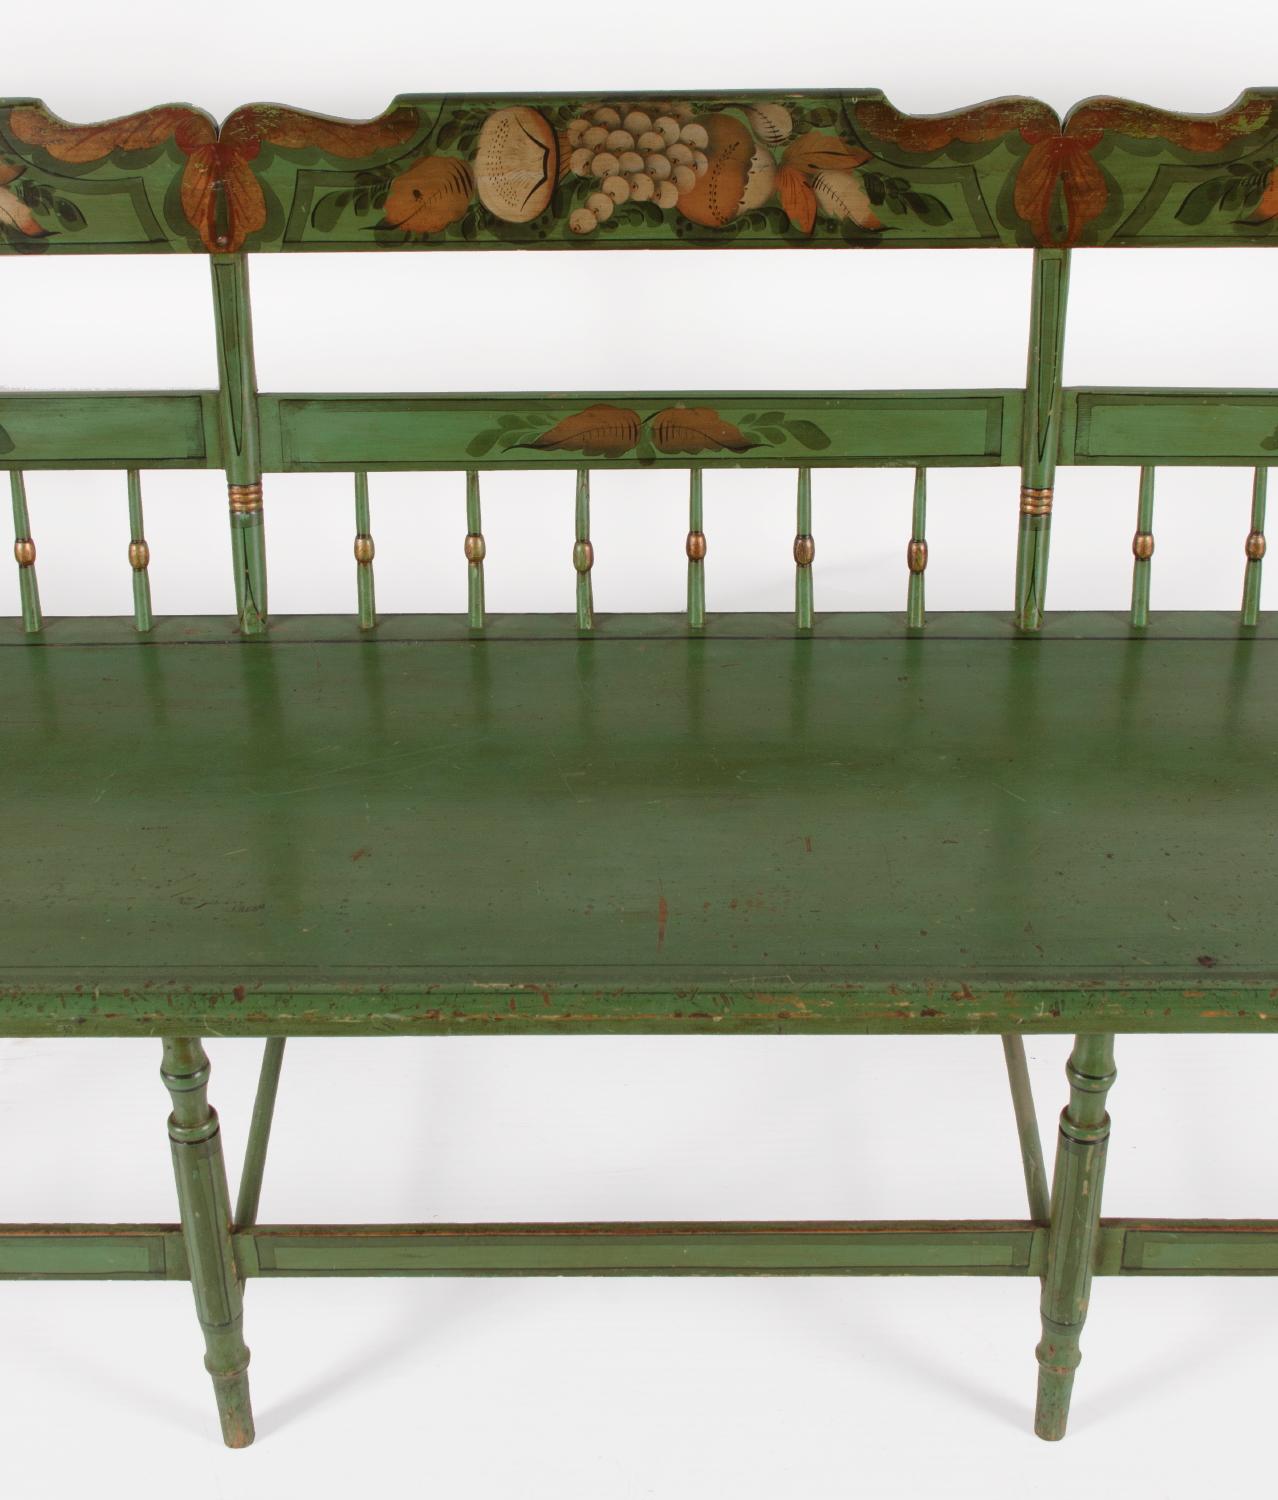 Apple Green, Plank Seat, Paint-Decorated Settee, ca 1845-1865 In Good Condition For Sale In York County, PA